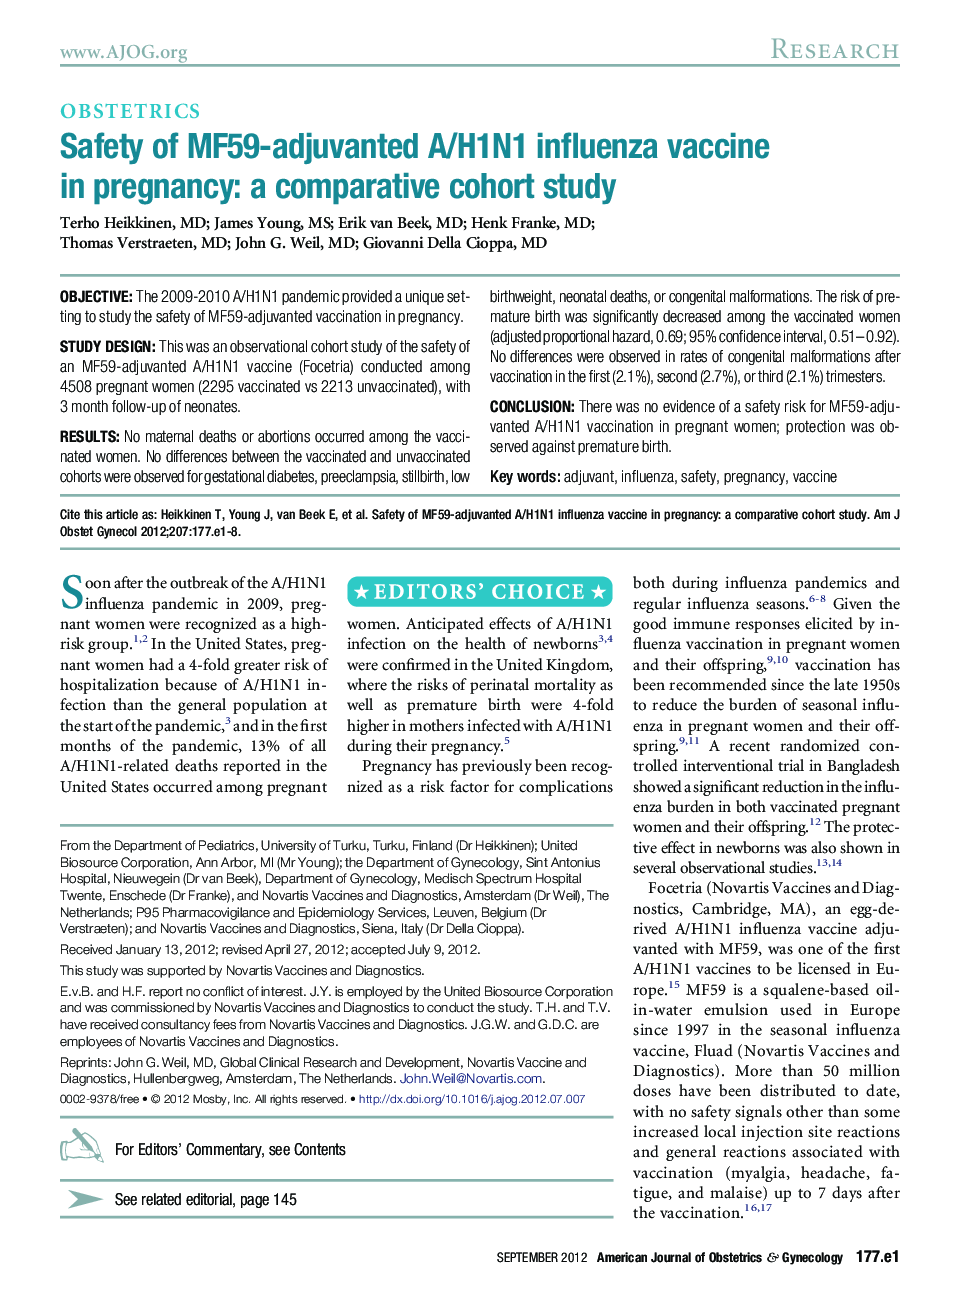 Safety of MF59-adjuvanted A/H1N1 influenza vaccine in pregnancy: a comparative cohort study